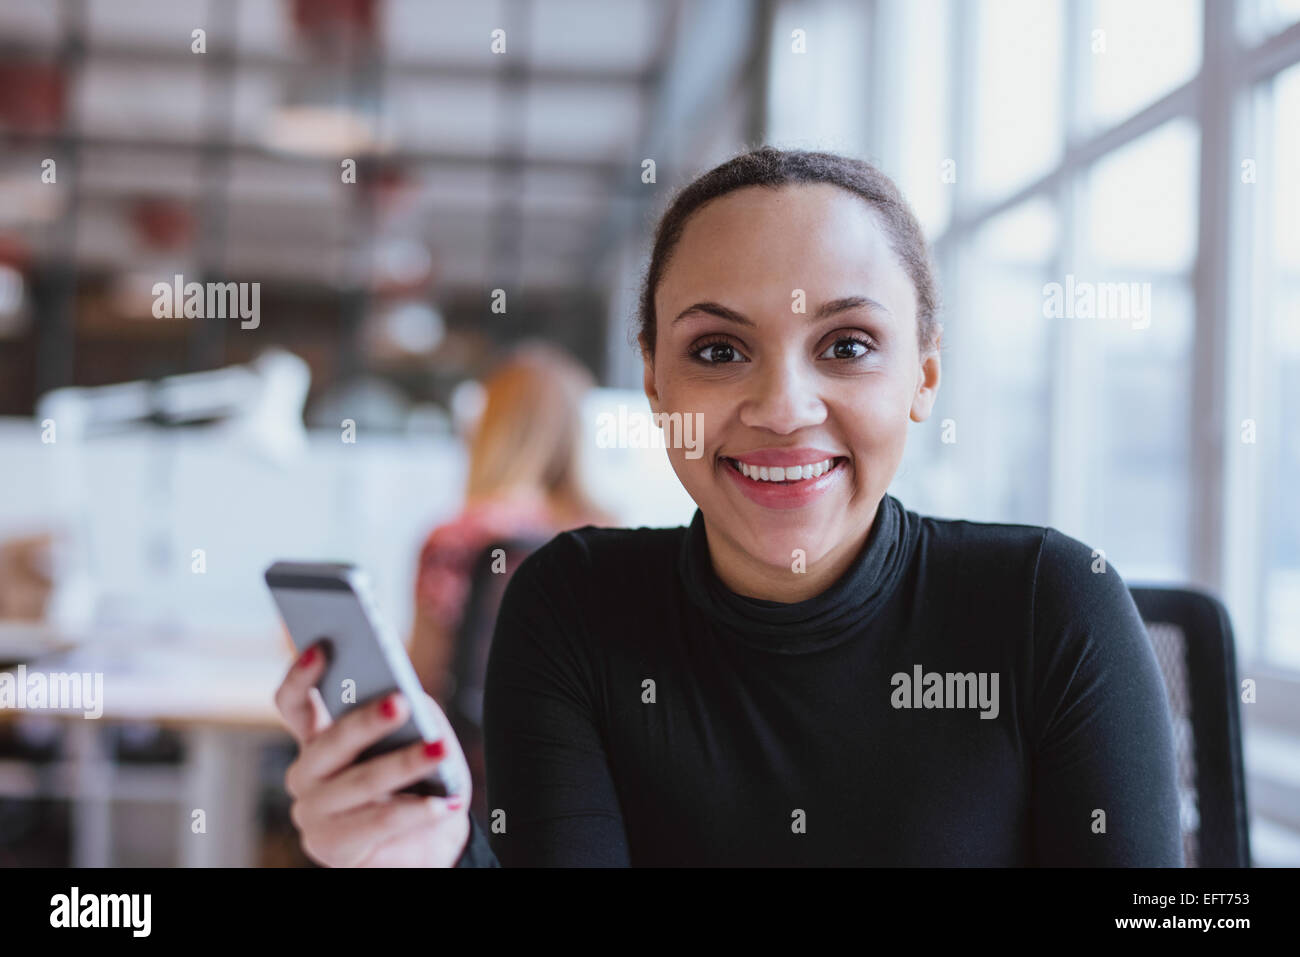 Portrait of young woman holding a mobile phone. African woman looking at camera in au travail. Banque D'Images